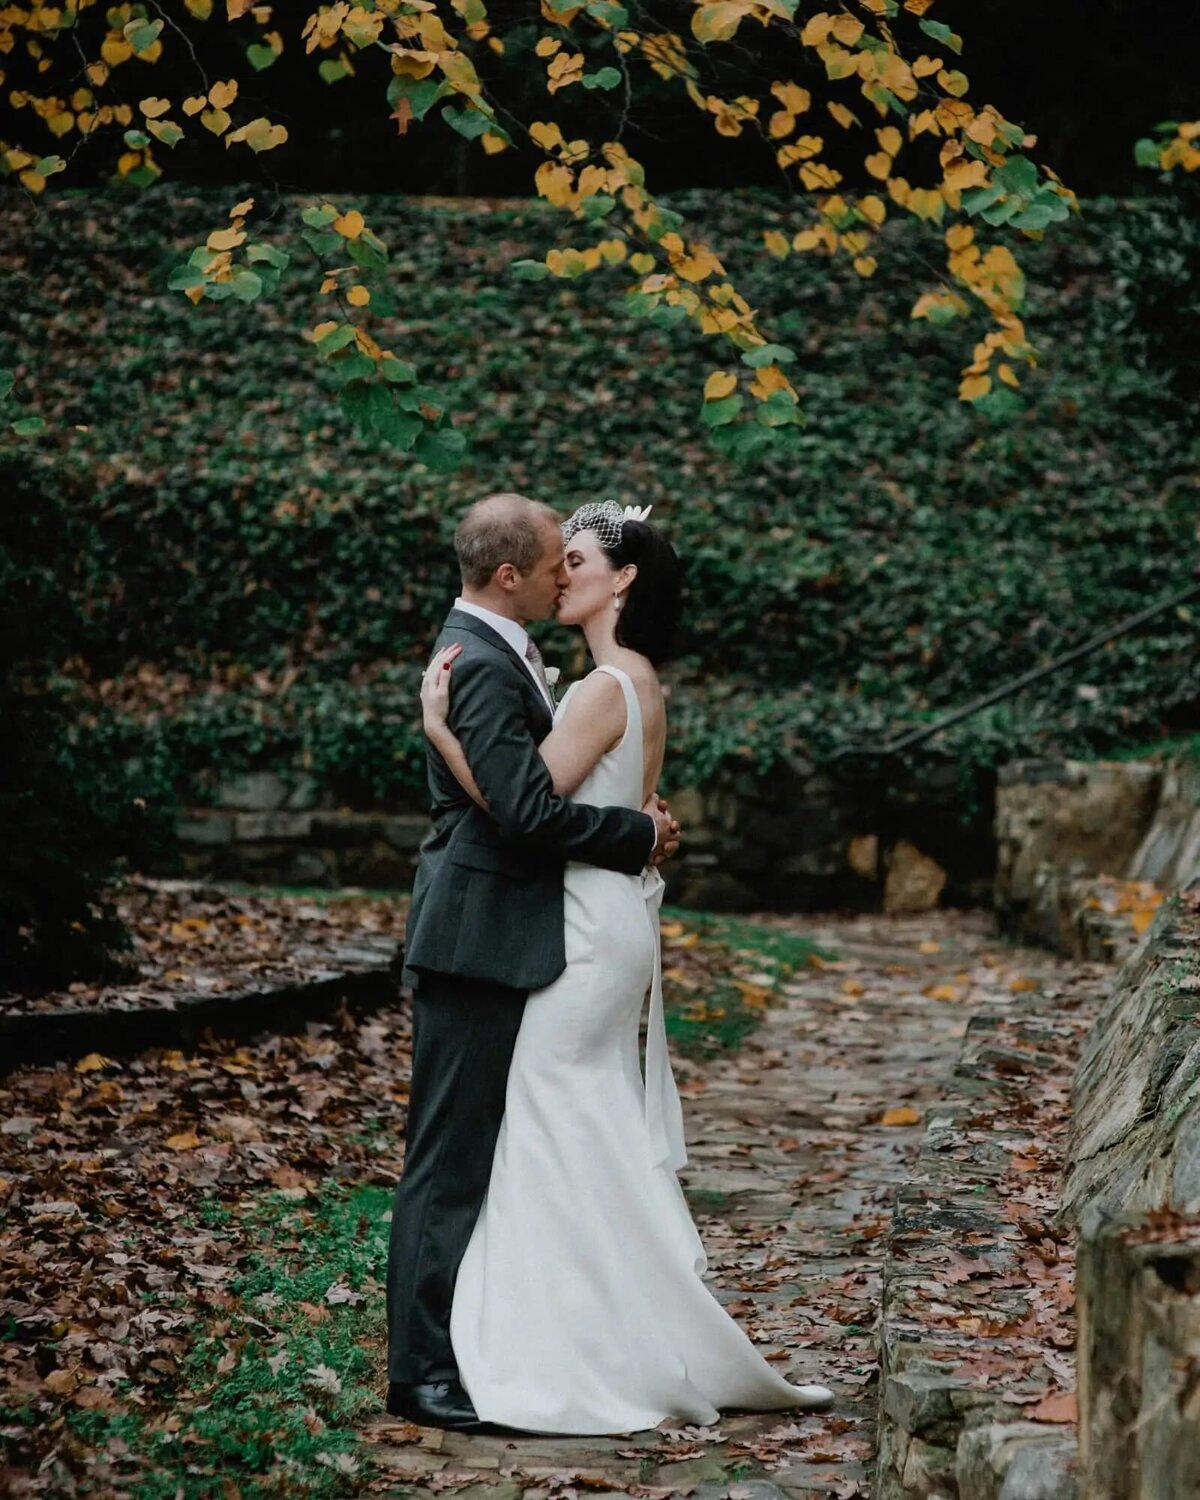 A bride and groom kissing on a leaf covered path.